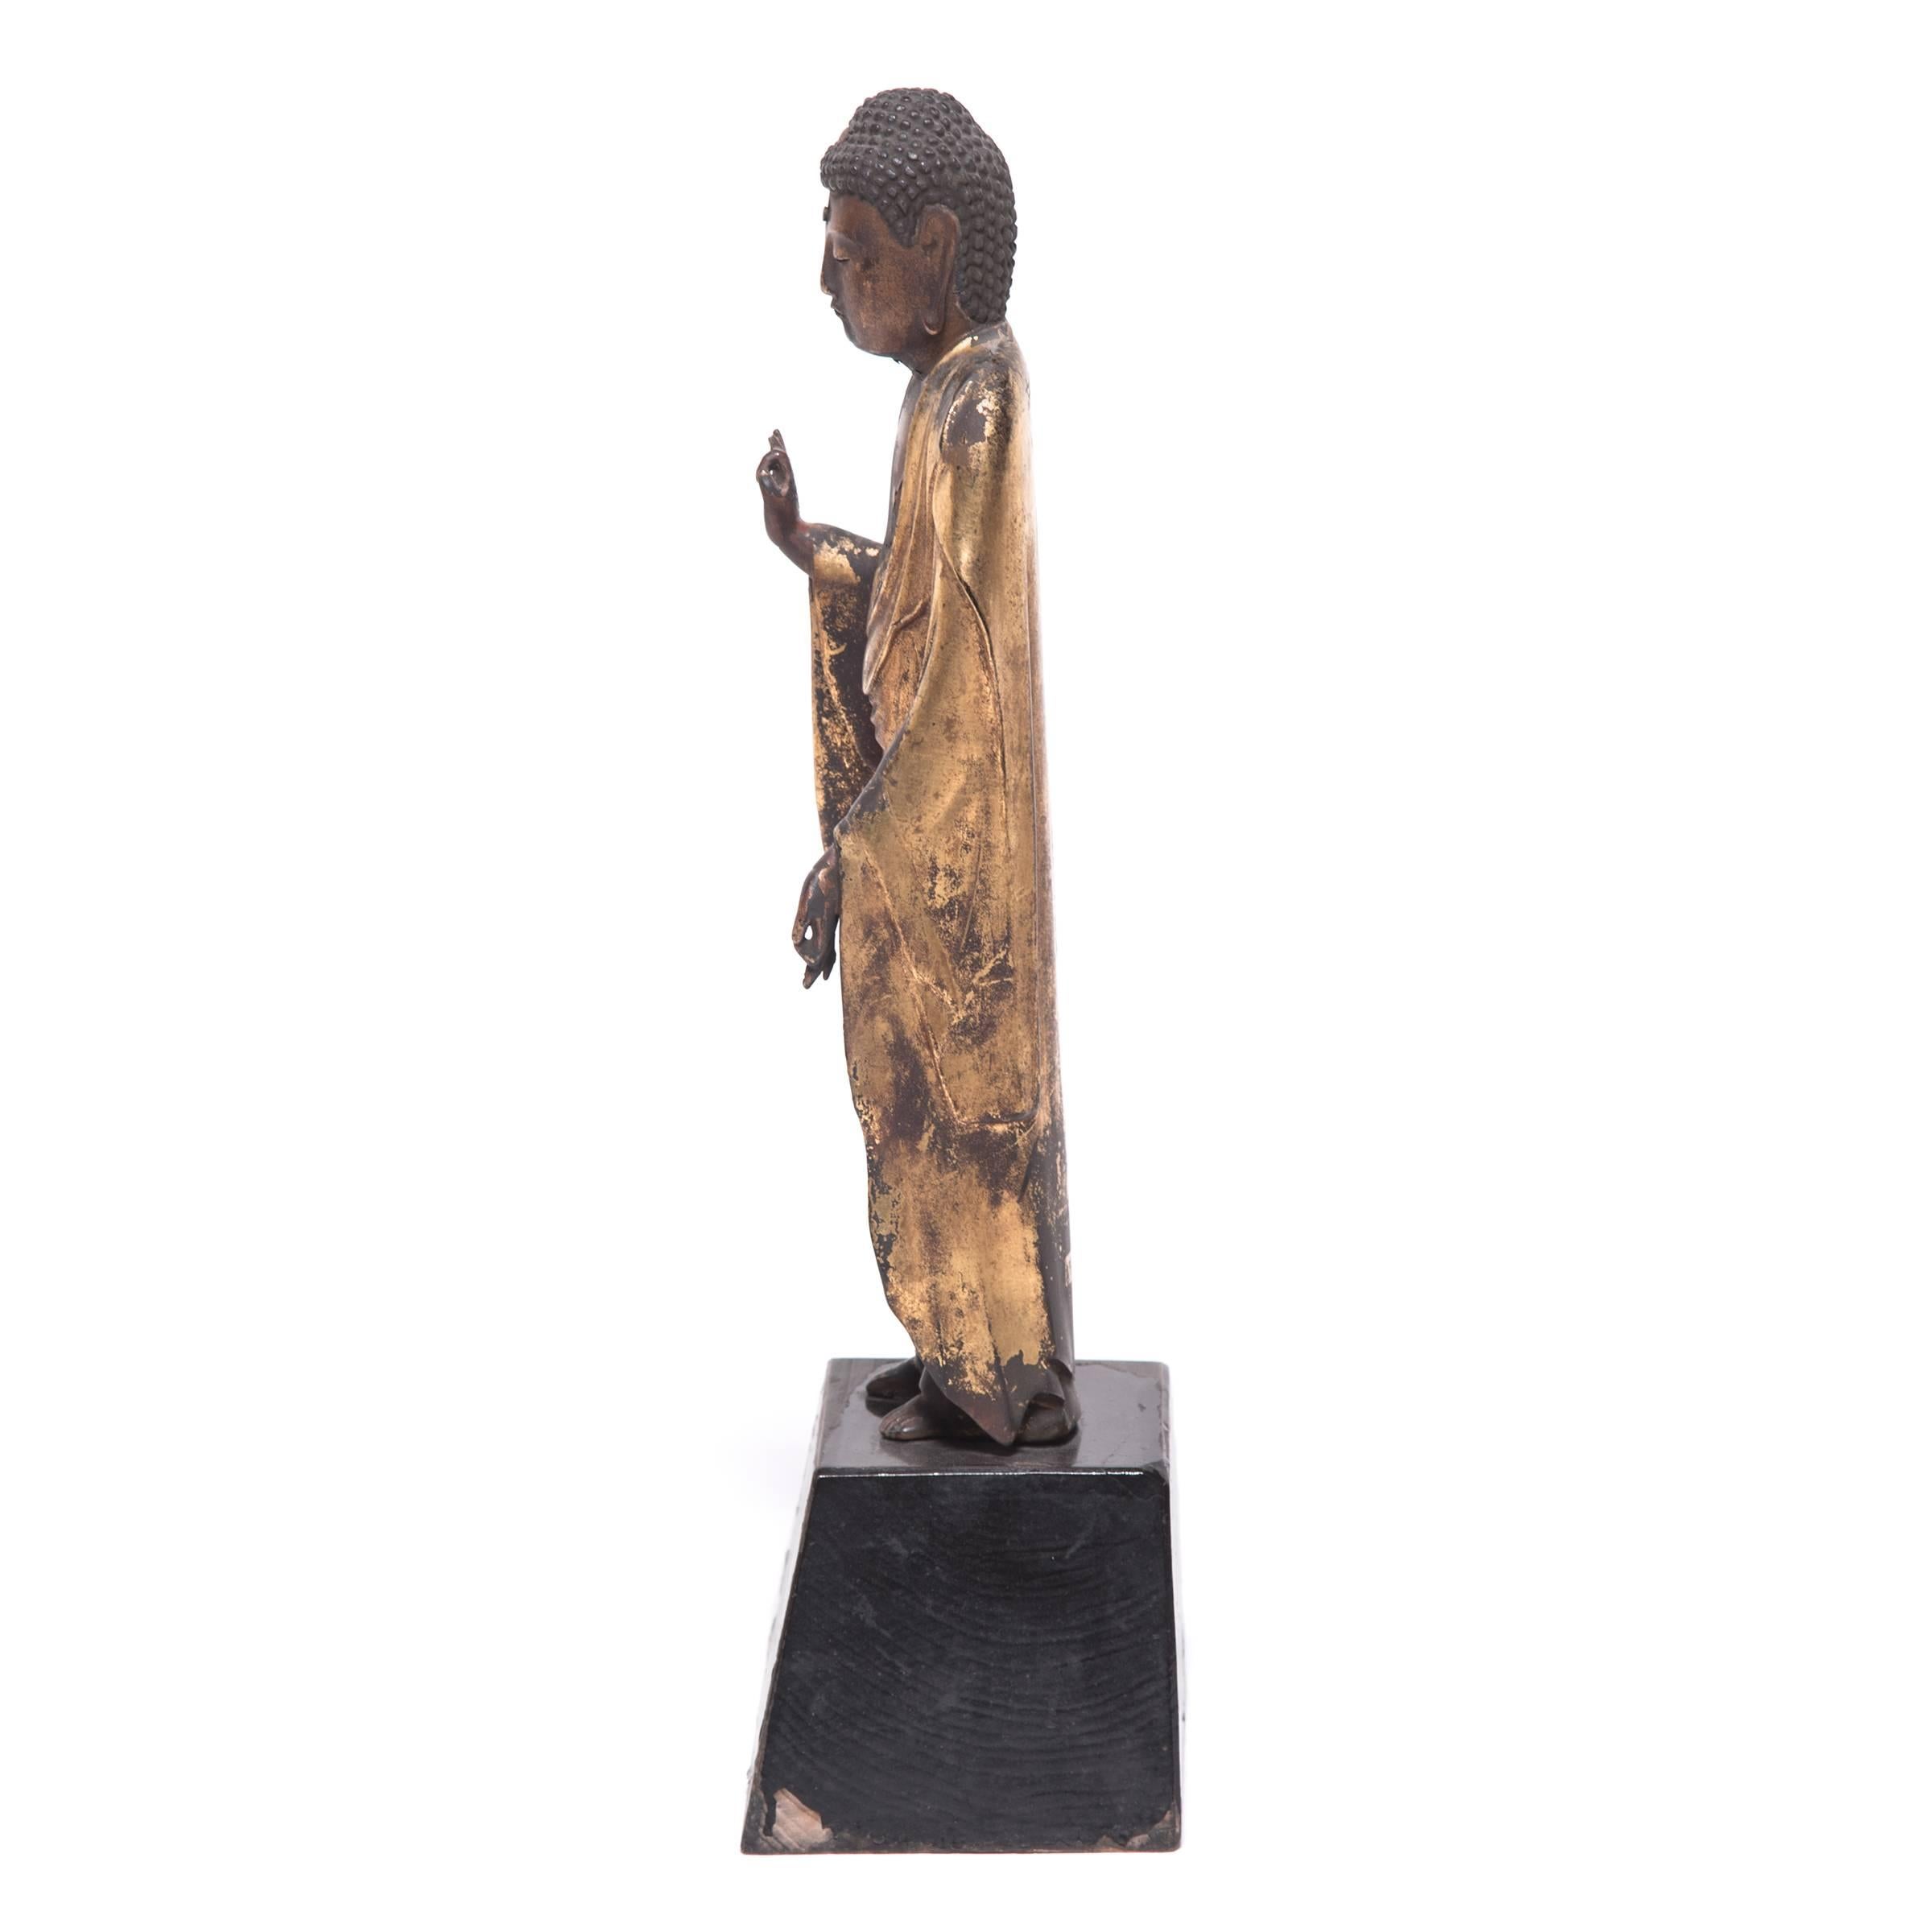 Decorated with black lacquer and gold leaf, this elegant Buddha sculpture was carved from wood in 1875 during Japan’s Meiji Restoration period. The figure presents the classic conventions of representing Buddha - the distended earlobes of his